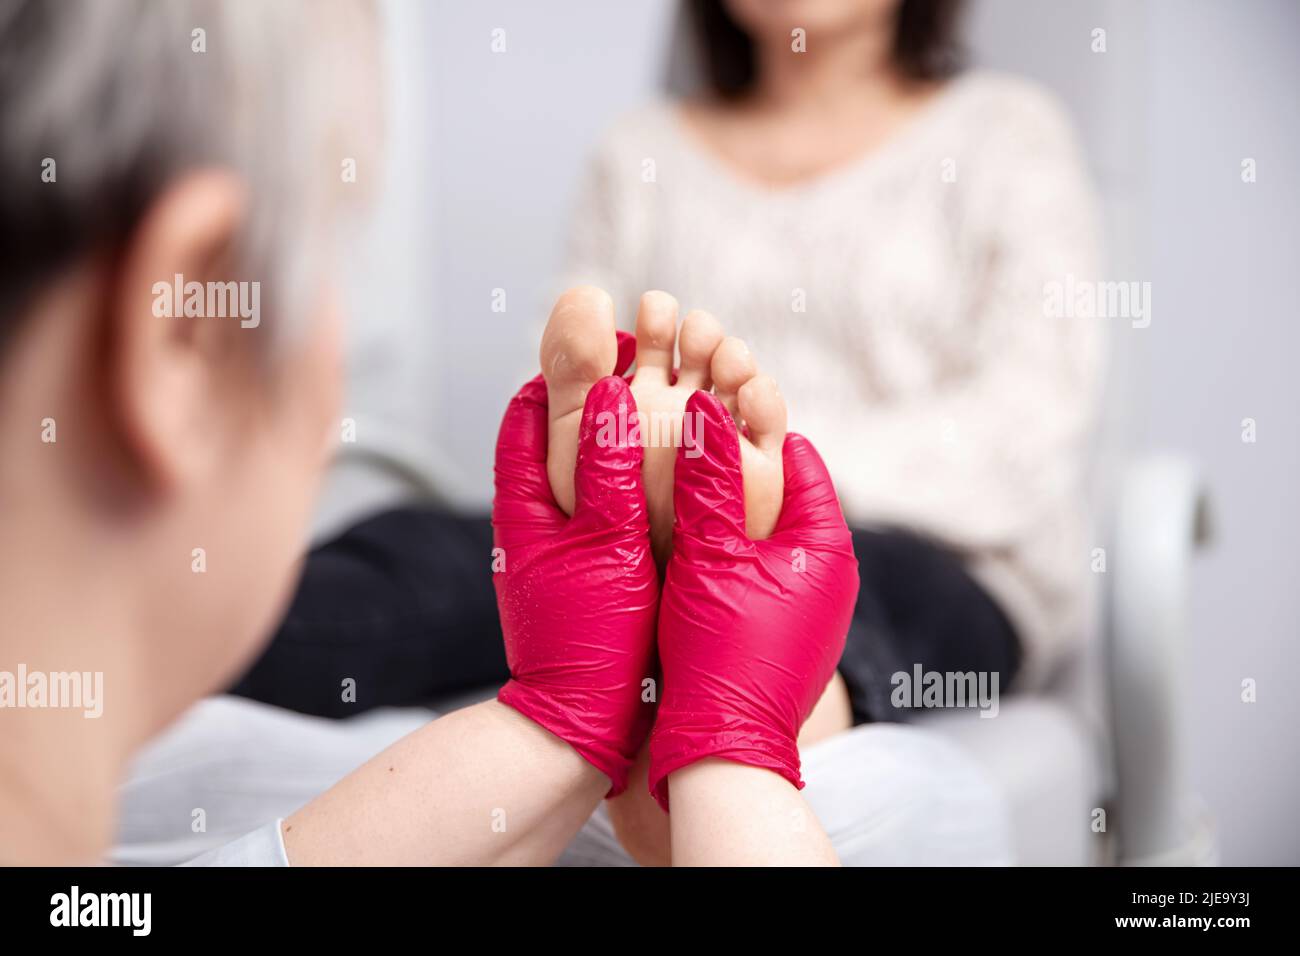 Foot treatment in SPA salon. Patient on medical pedicure procedure Stock Photo